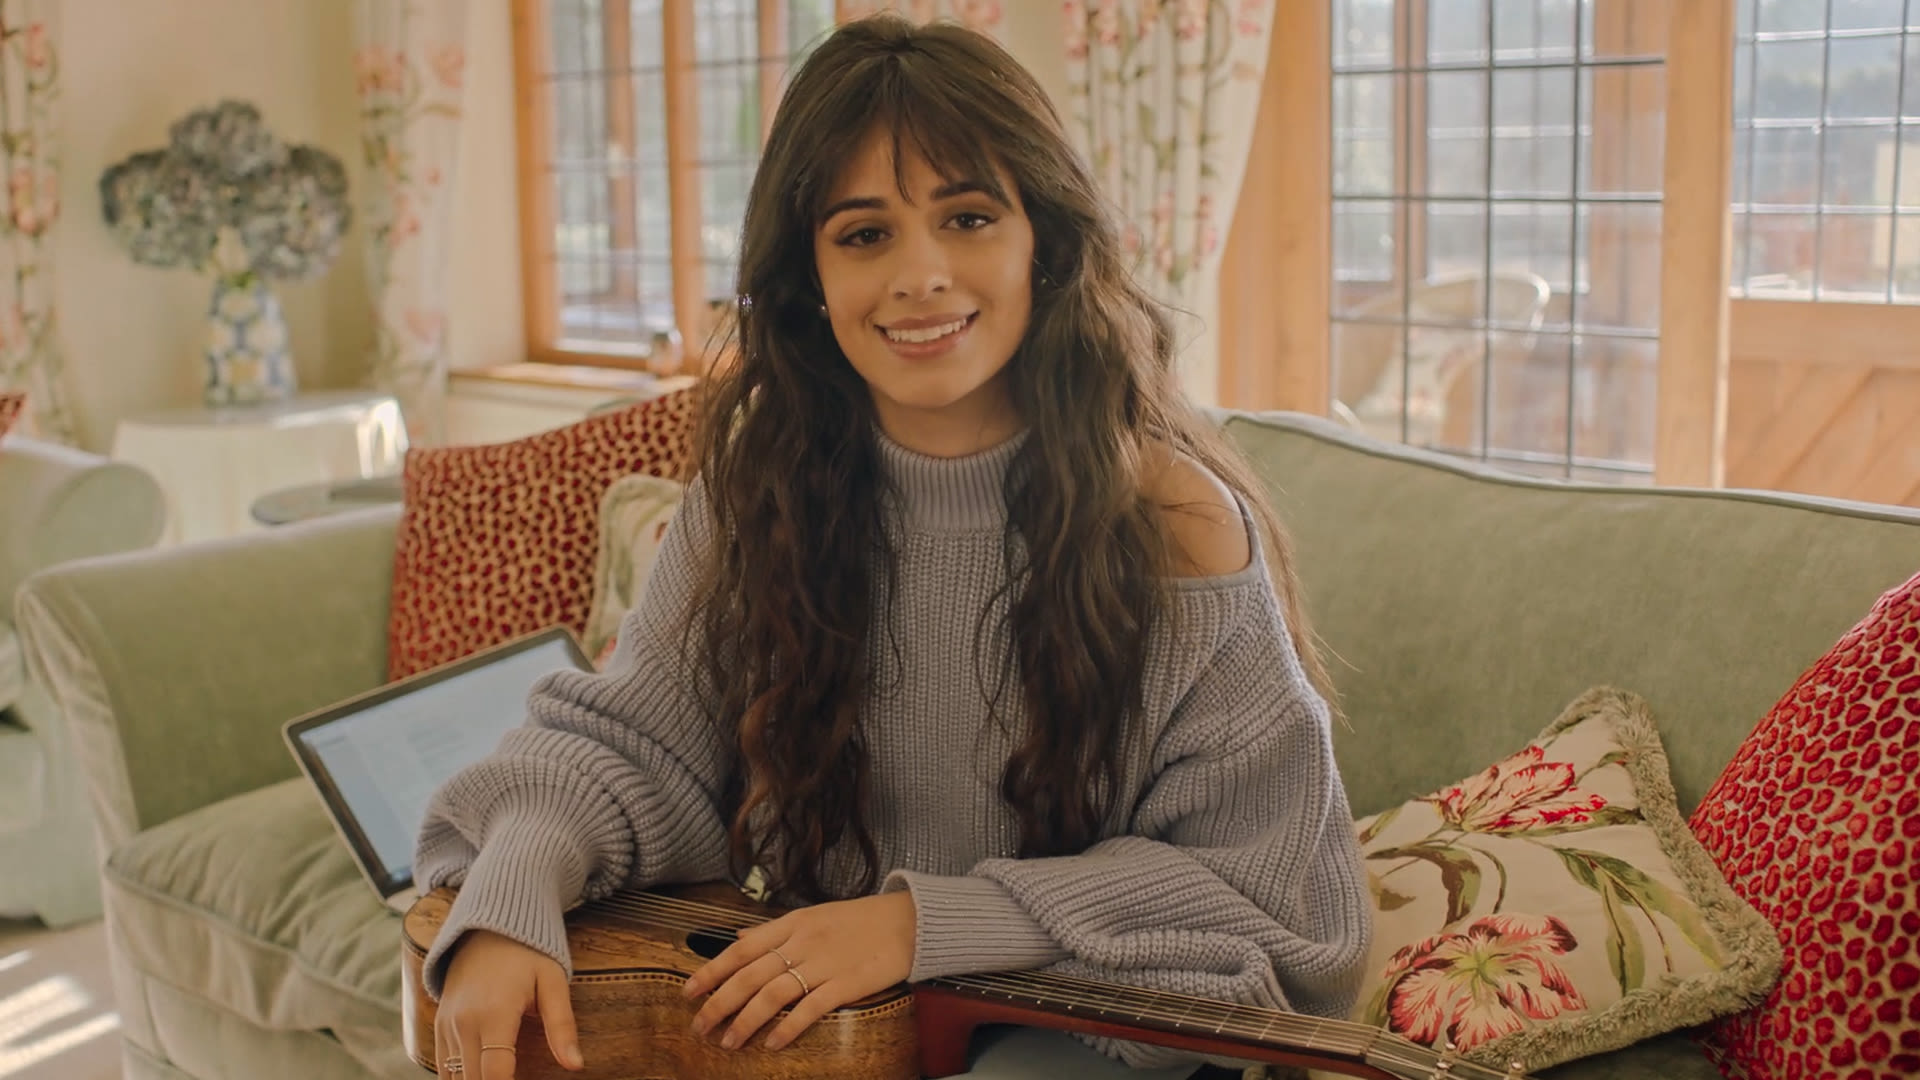 Watch 73 Questions Answered By Your Favorite Celebs Camila Cabello On